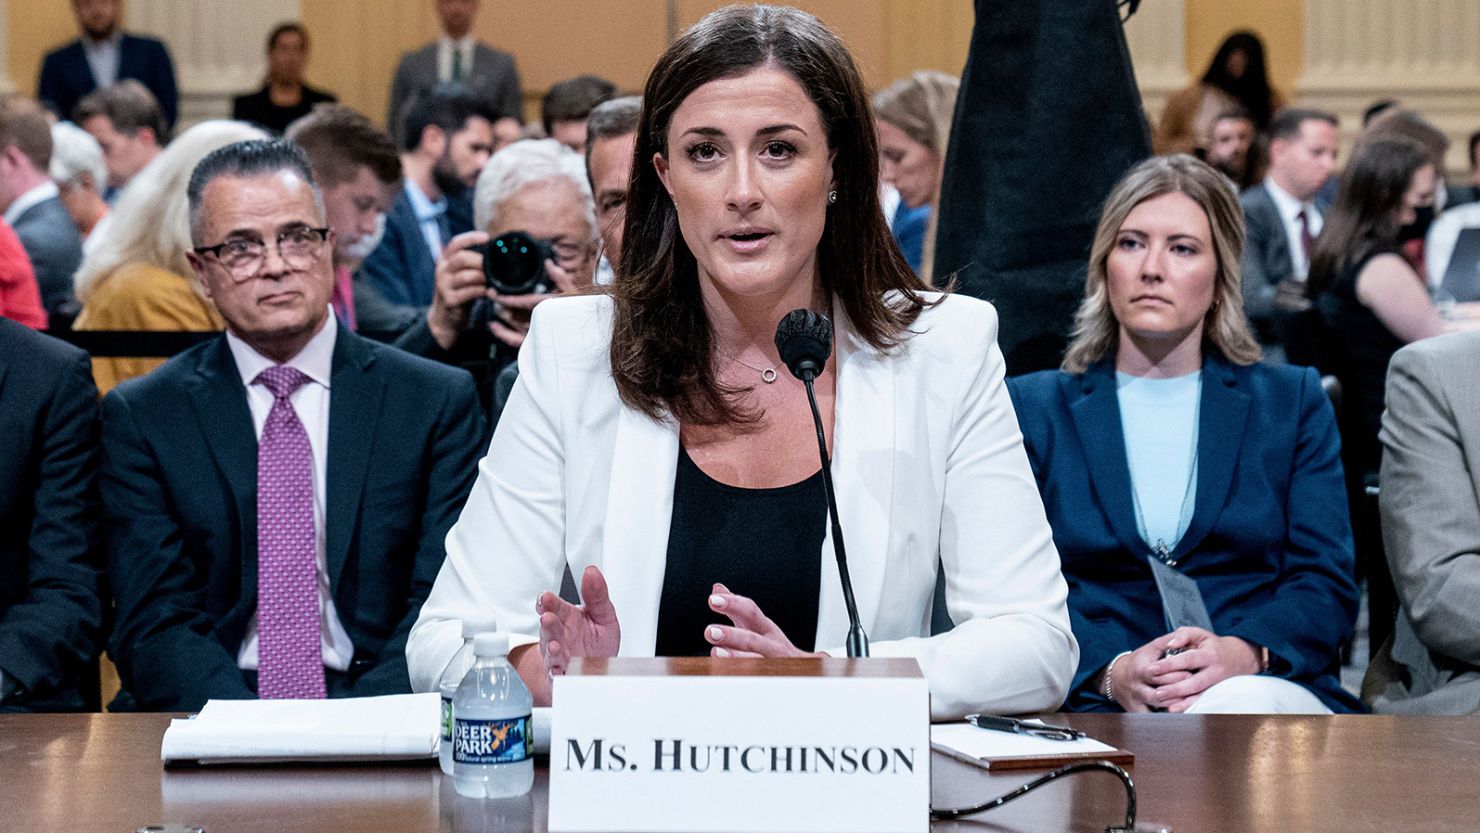 Cassidy Hutchinson, an aide to then-White House chief of staff Mark Meadows, testifies before the House select committee.